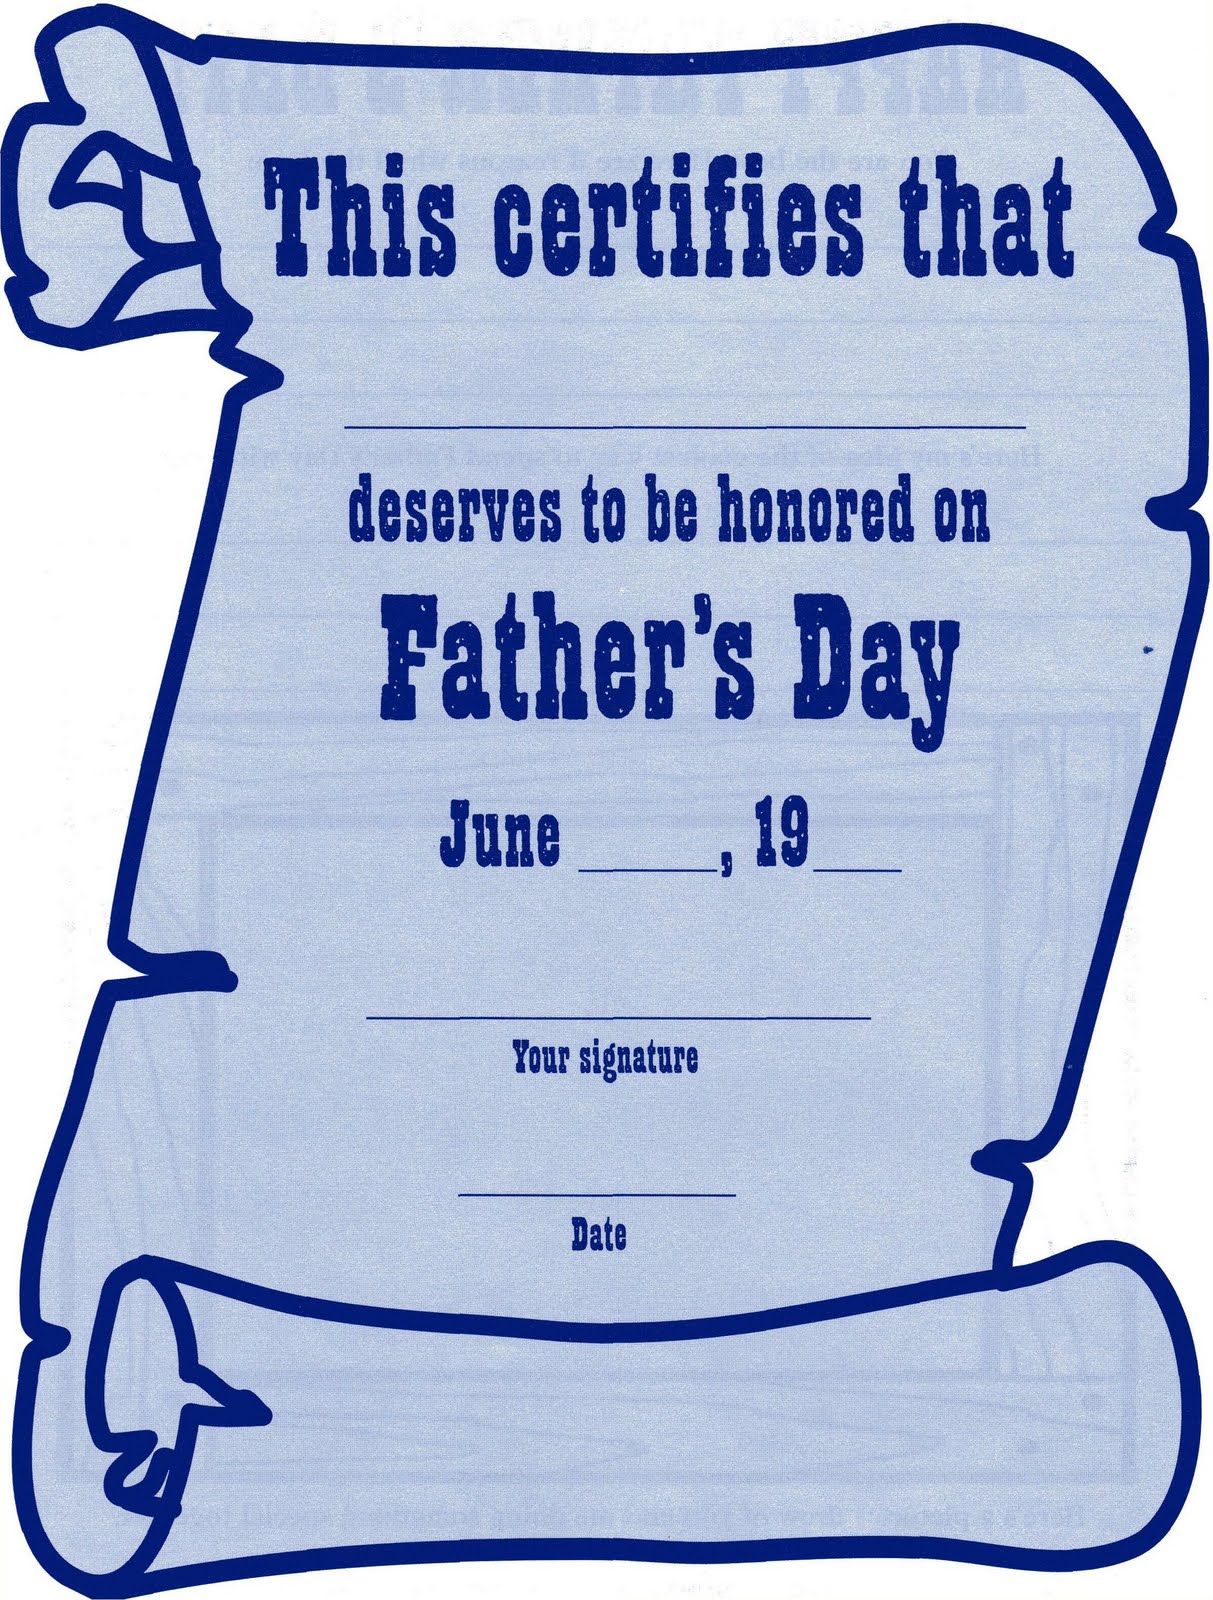 elementary-school-enrichment-activities-father-s-day-certificate